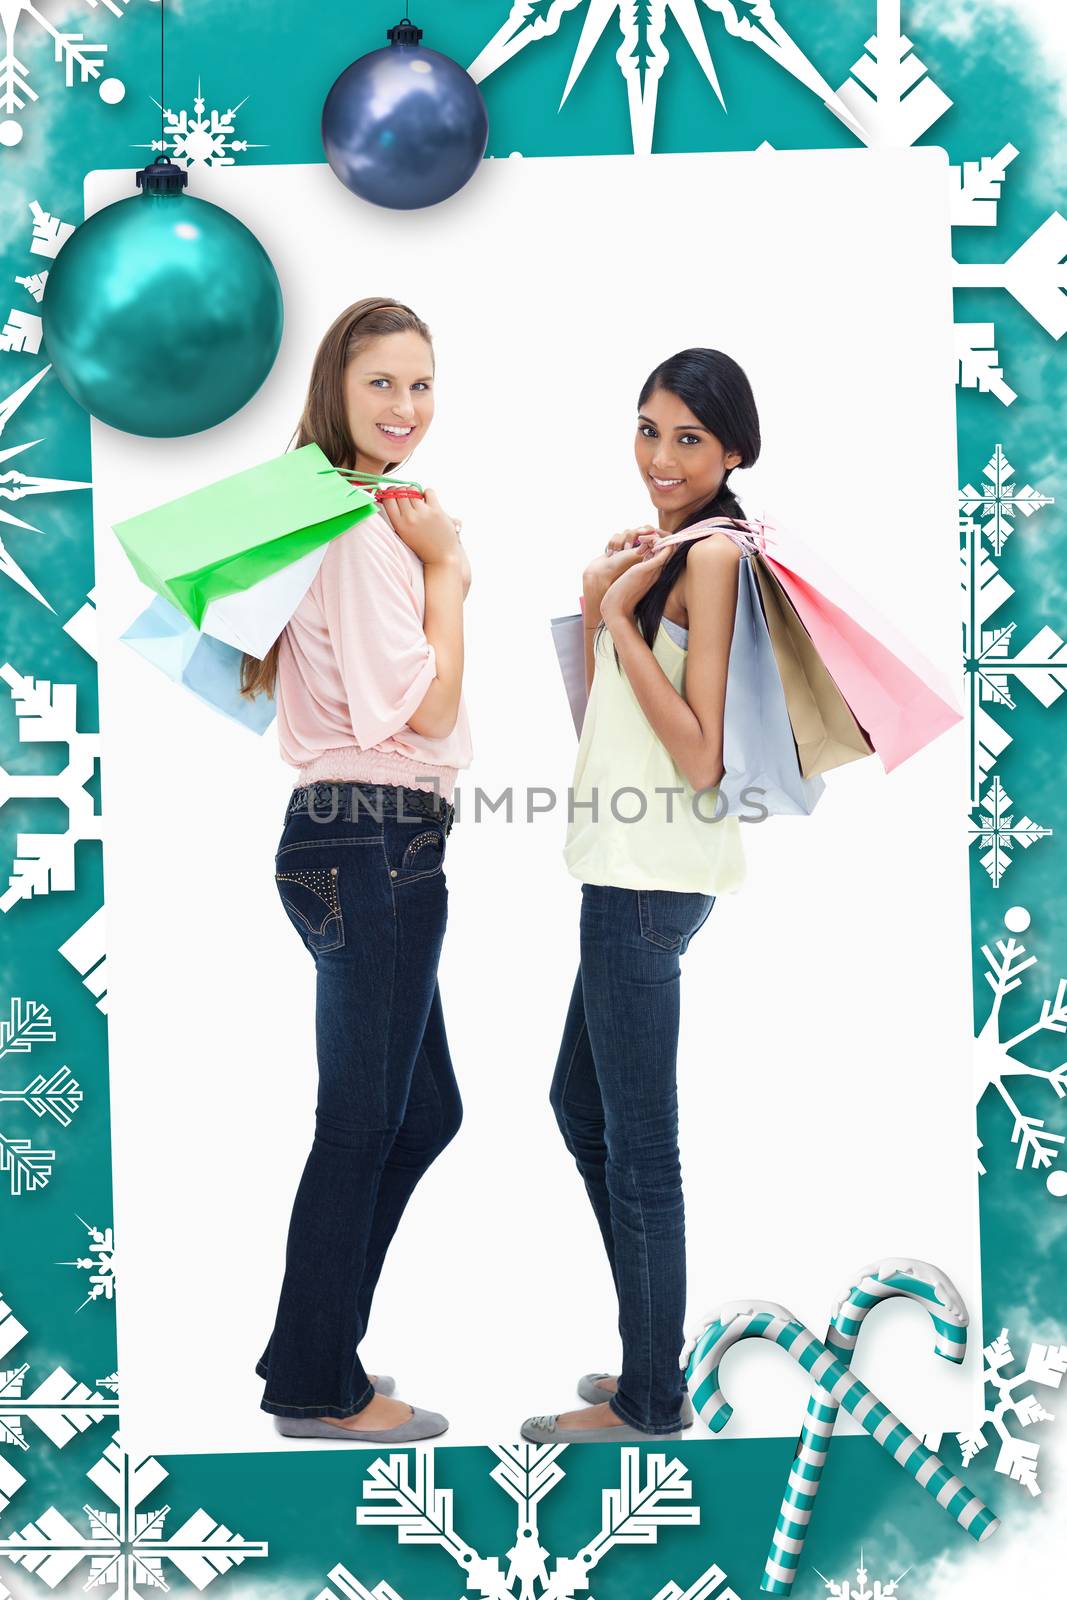 Smiling women carrying a lot of shopping bags against christmas frame